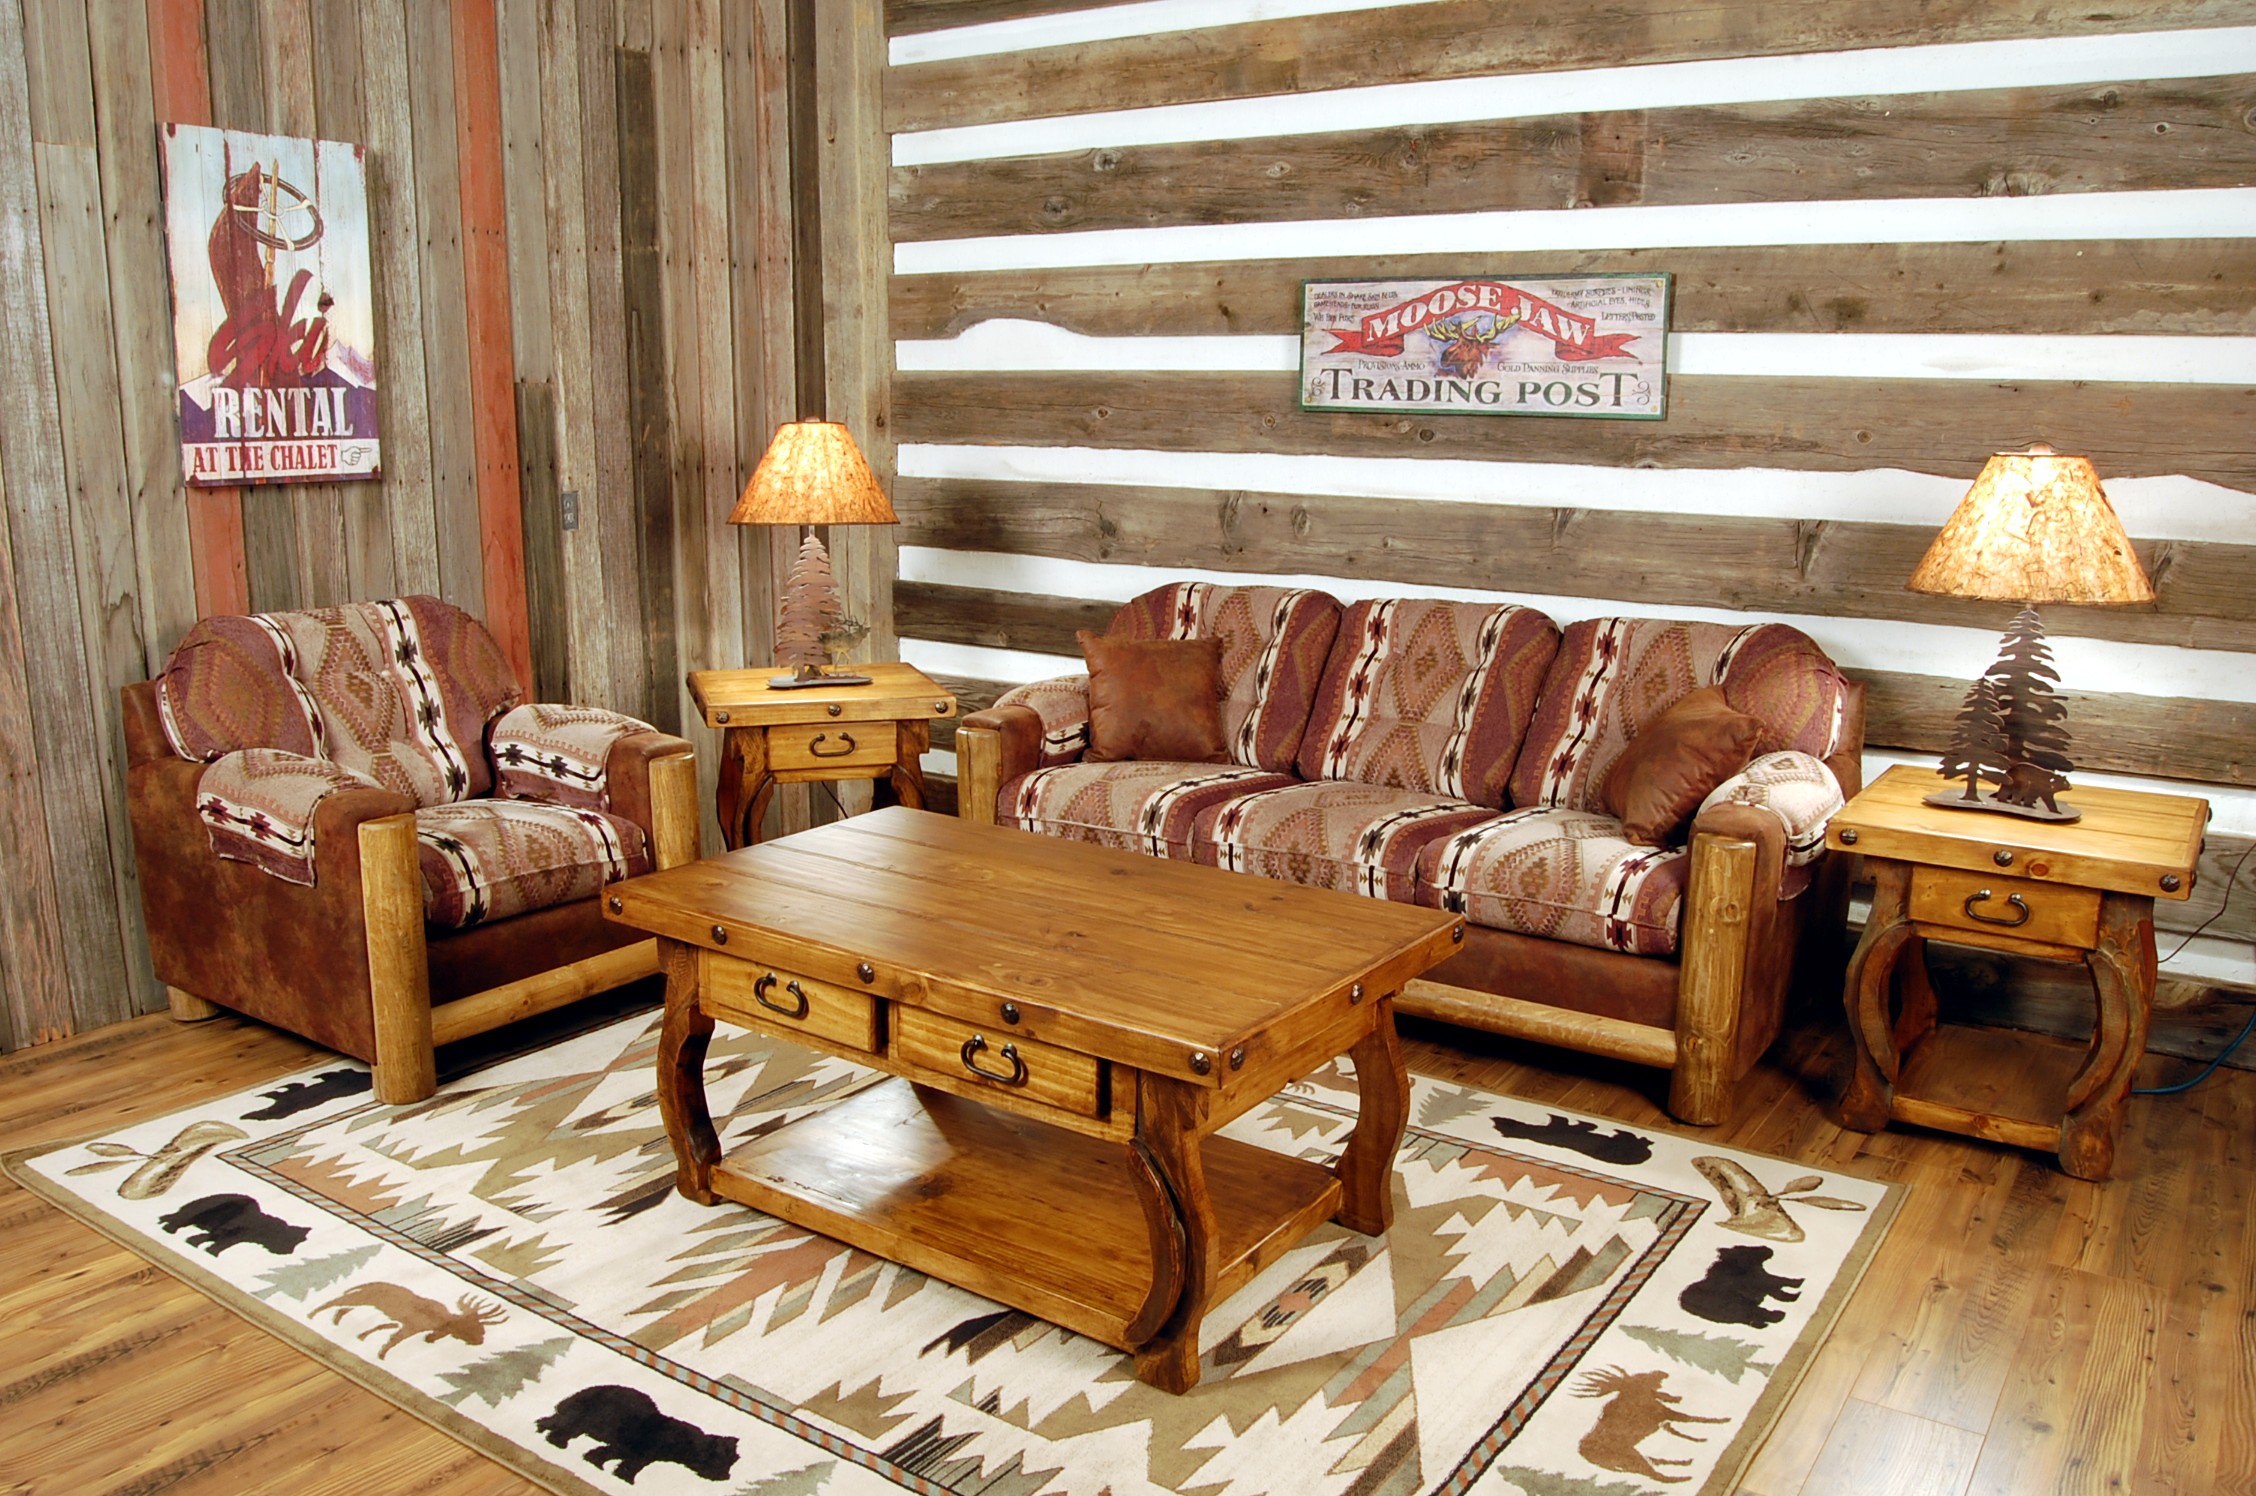 country style living room interior photo